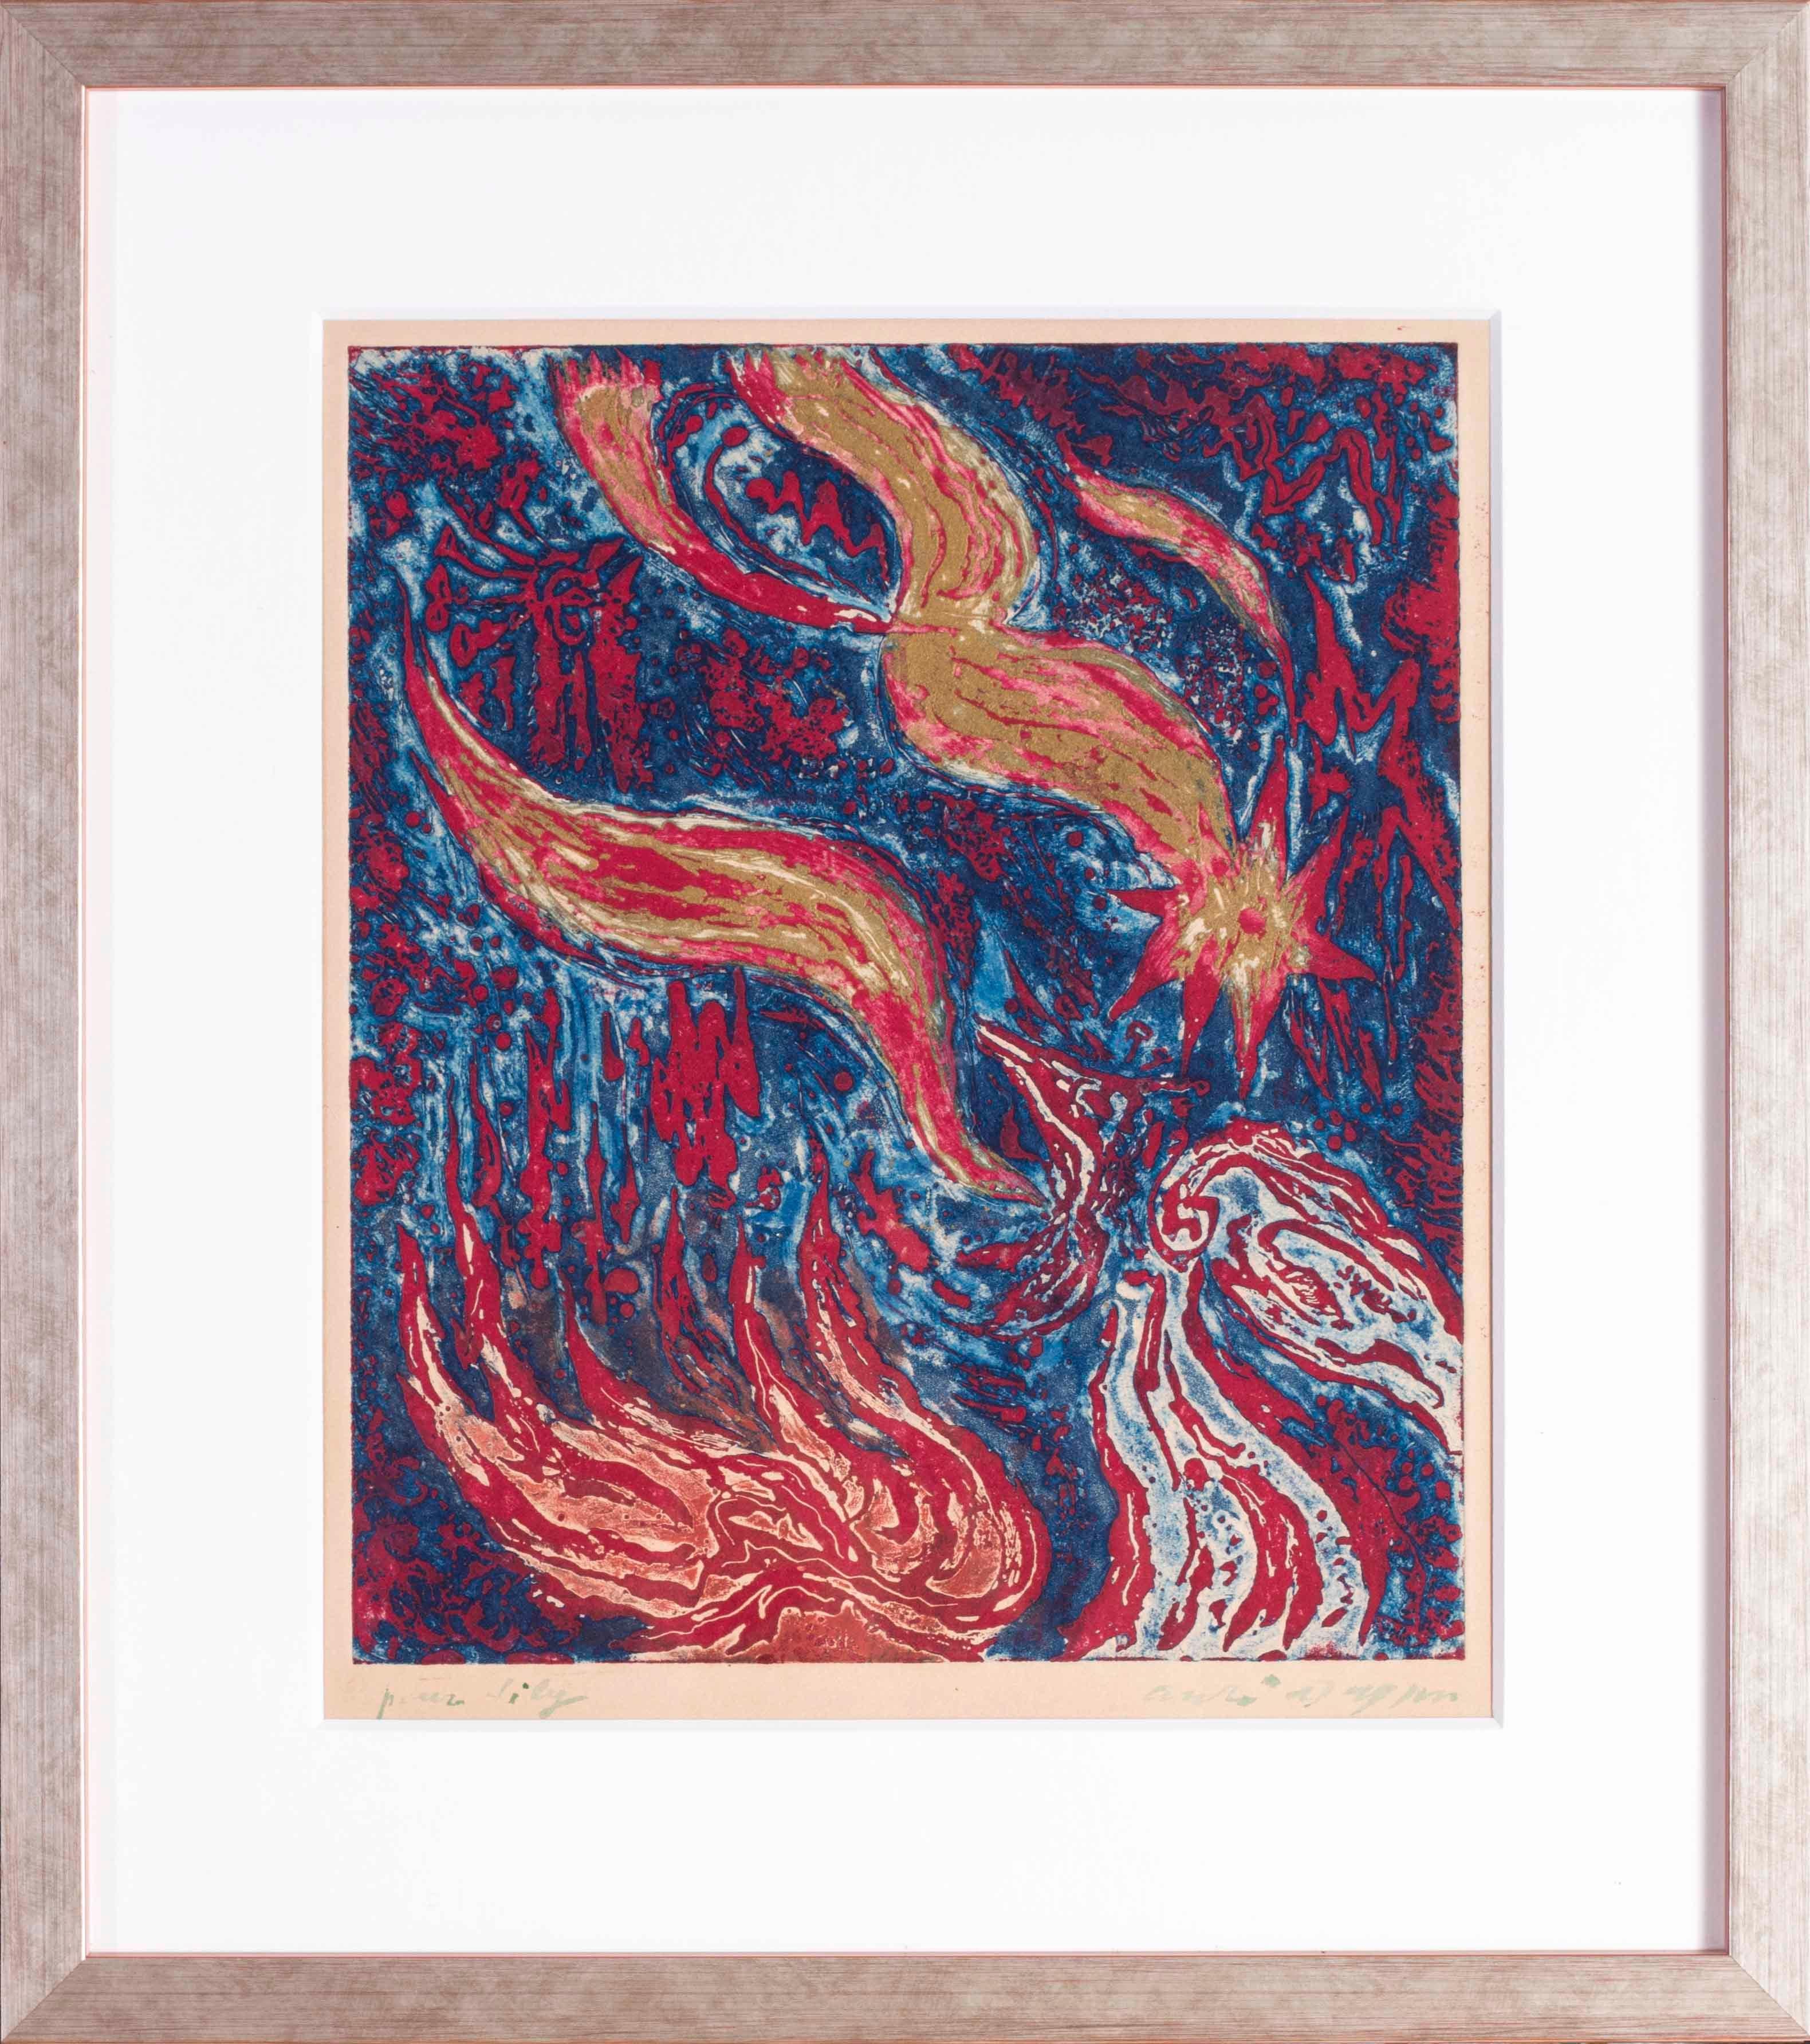 André Masson Abstract Print - Dedicated lithograph by Andre Masson to his daughter Lily